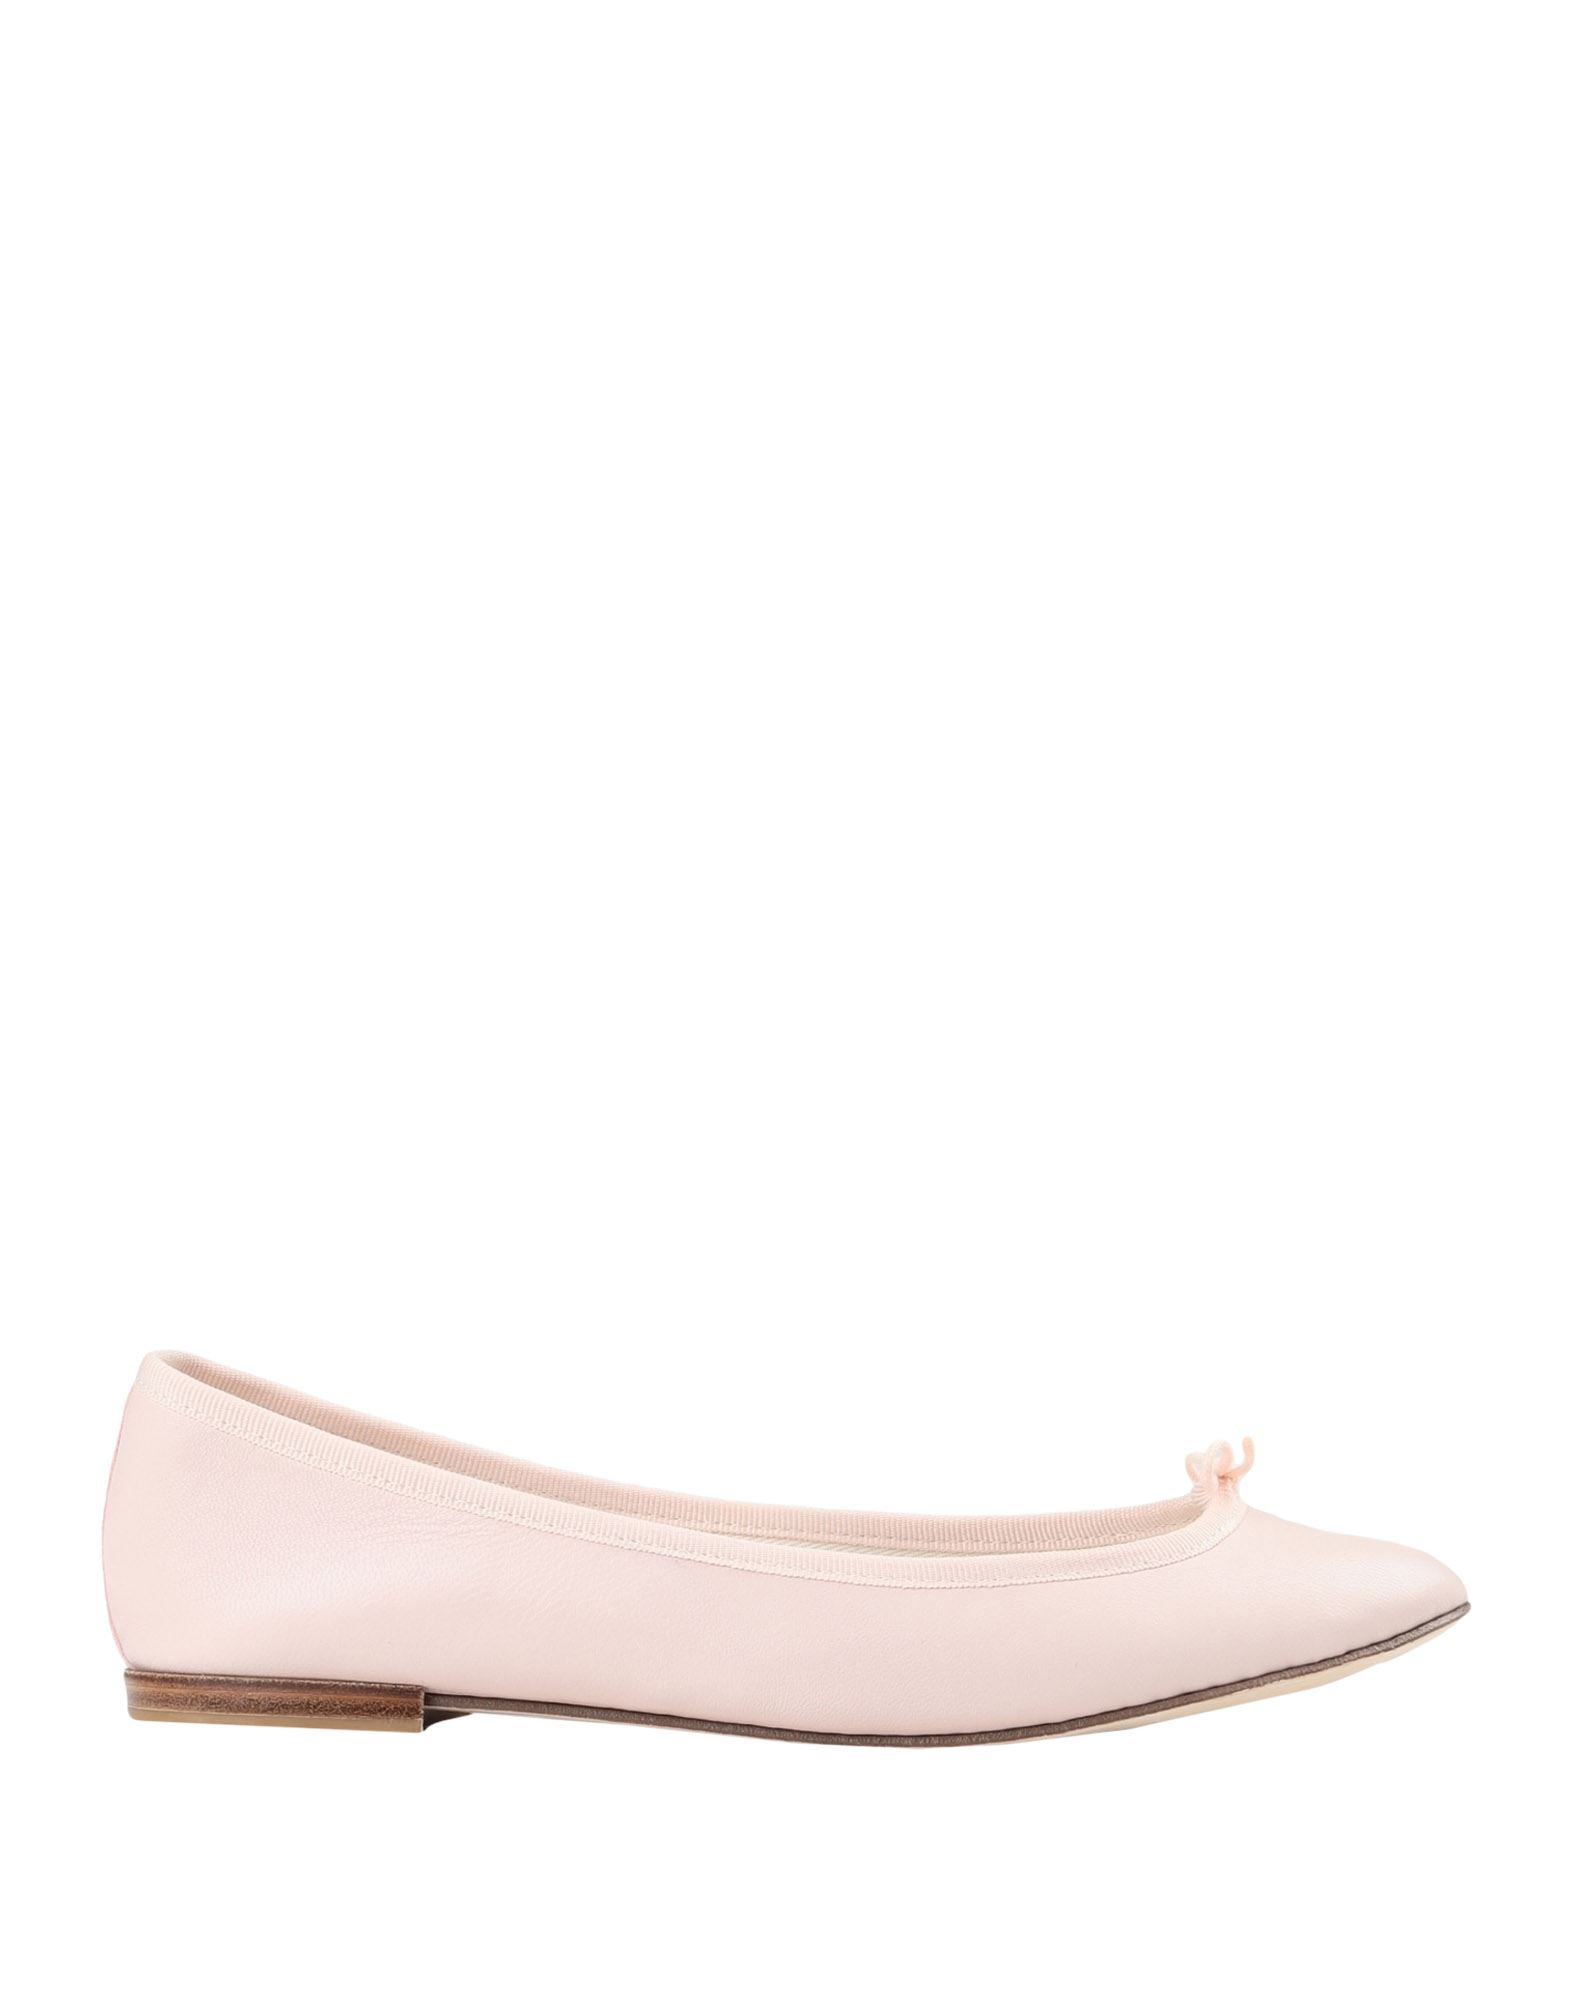 Repetto Ballet Flats In Light Pink | ModeSens